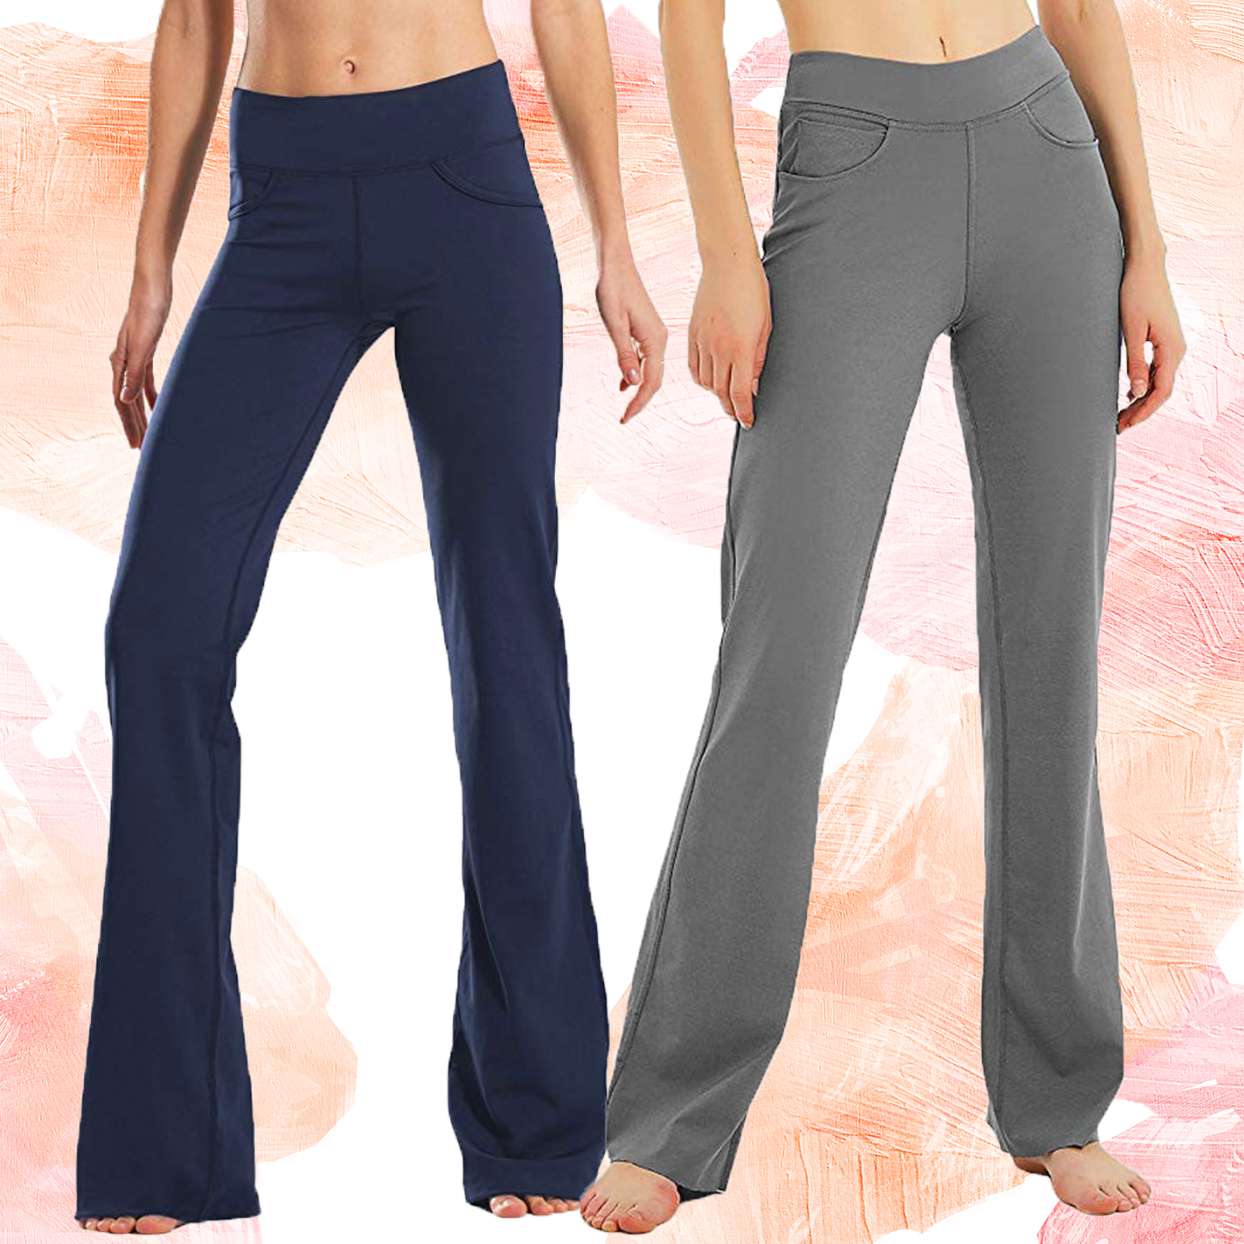 Safort Flare Yoga Pants Fit People of All Heights Thanks to a Unique ...